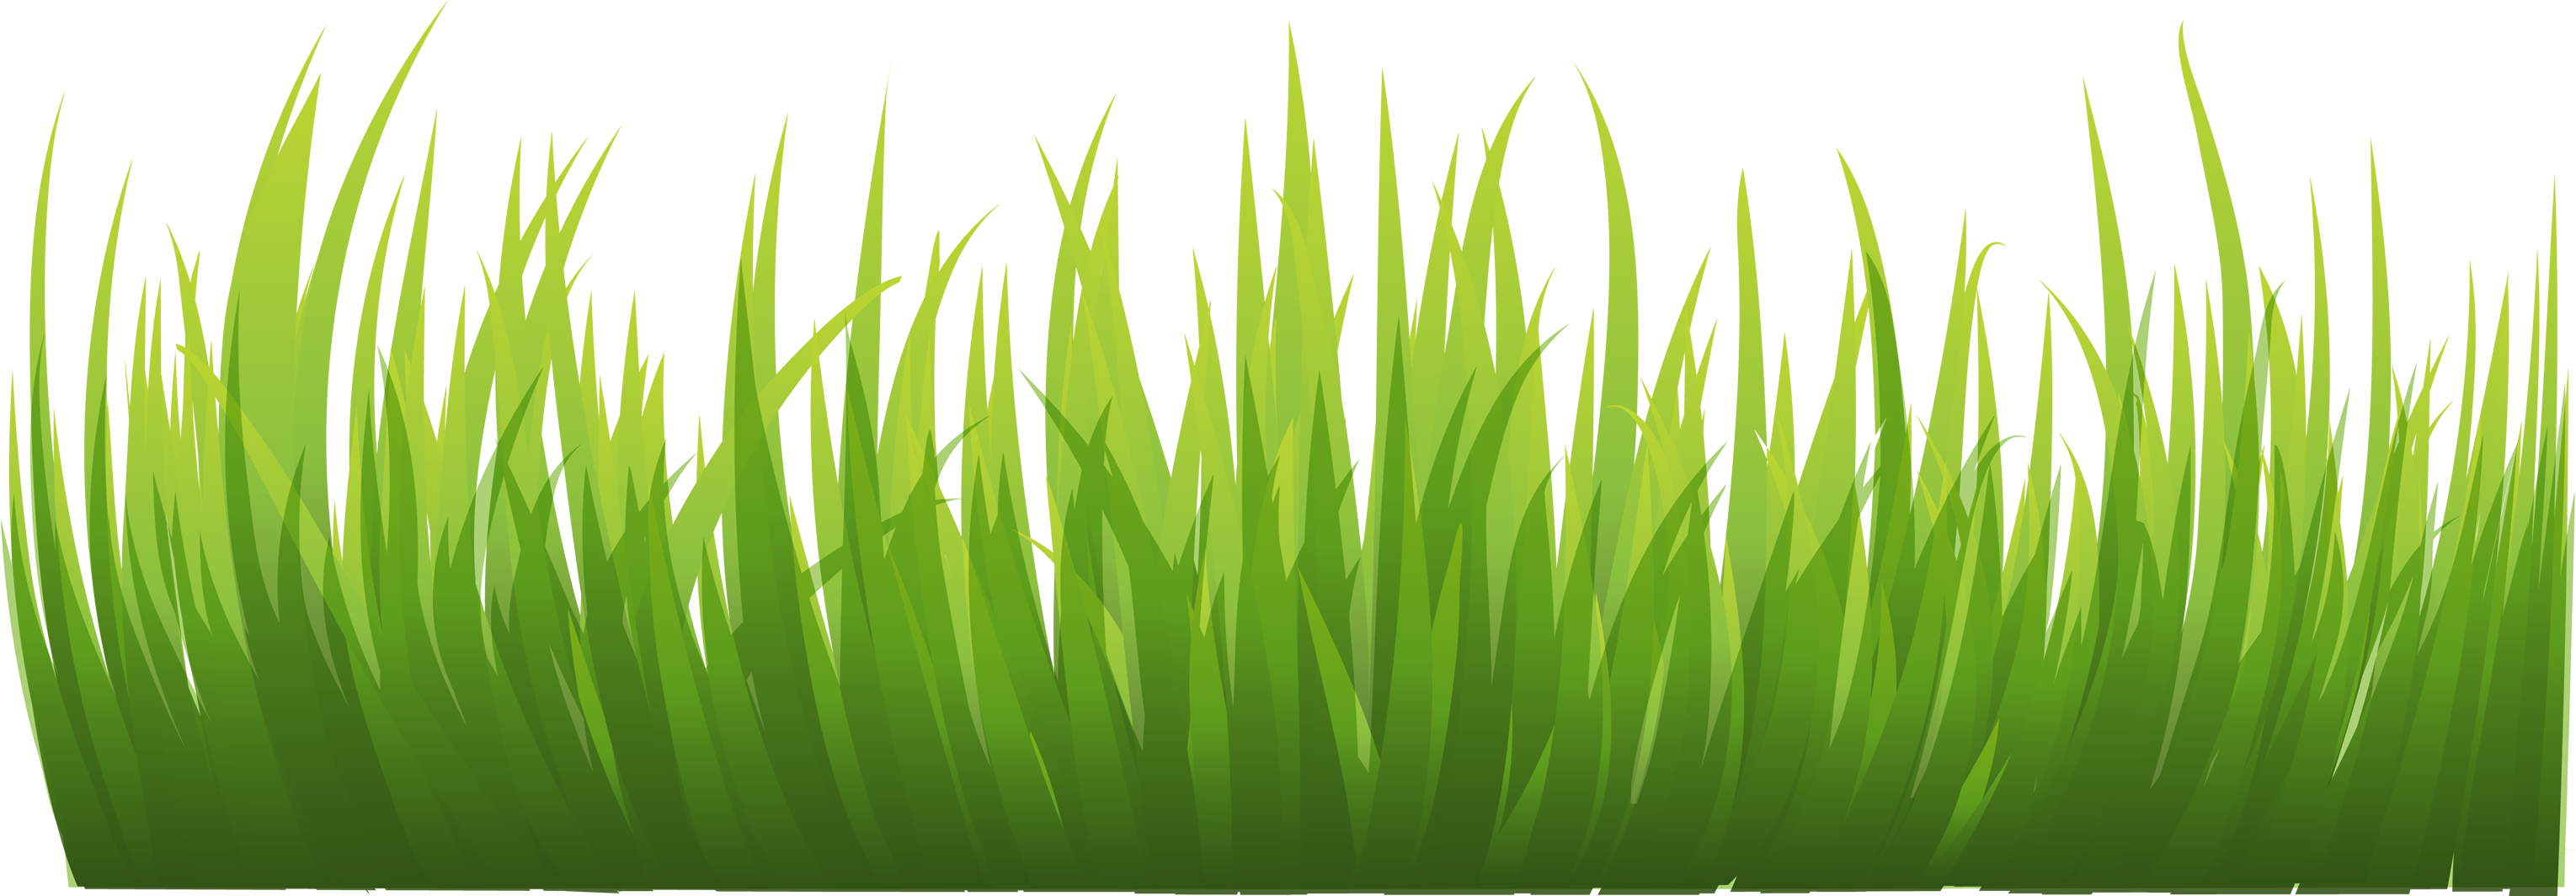 Grass Image Green Grass Picture Png Transparent Background Free Download Freeiconspng